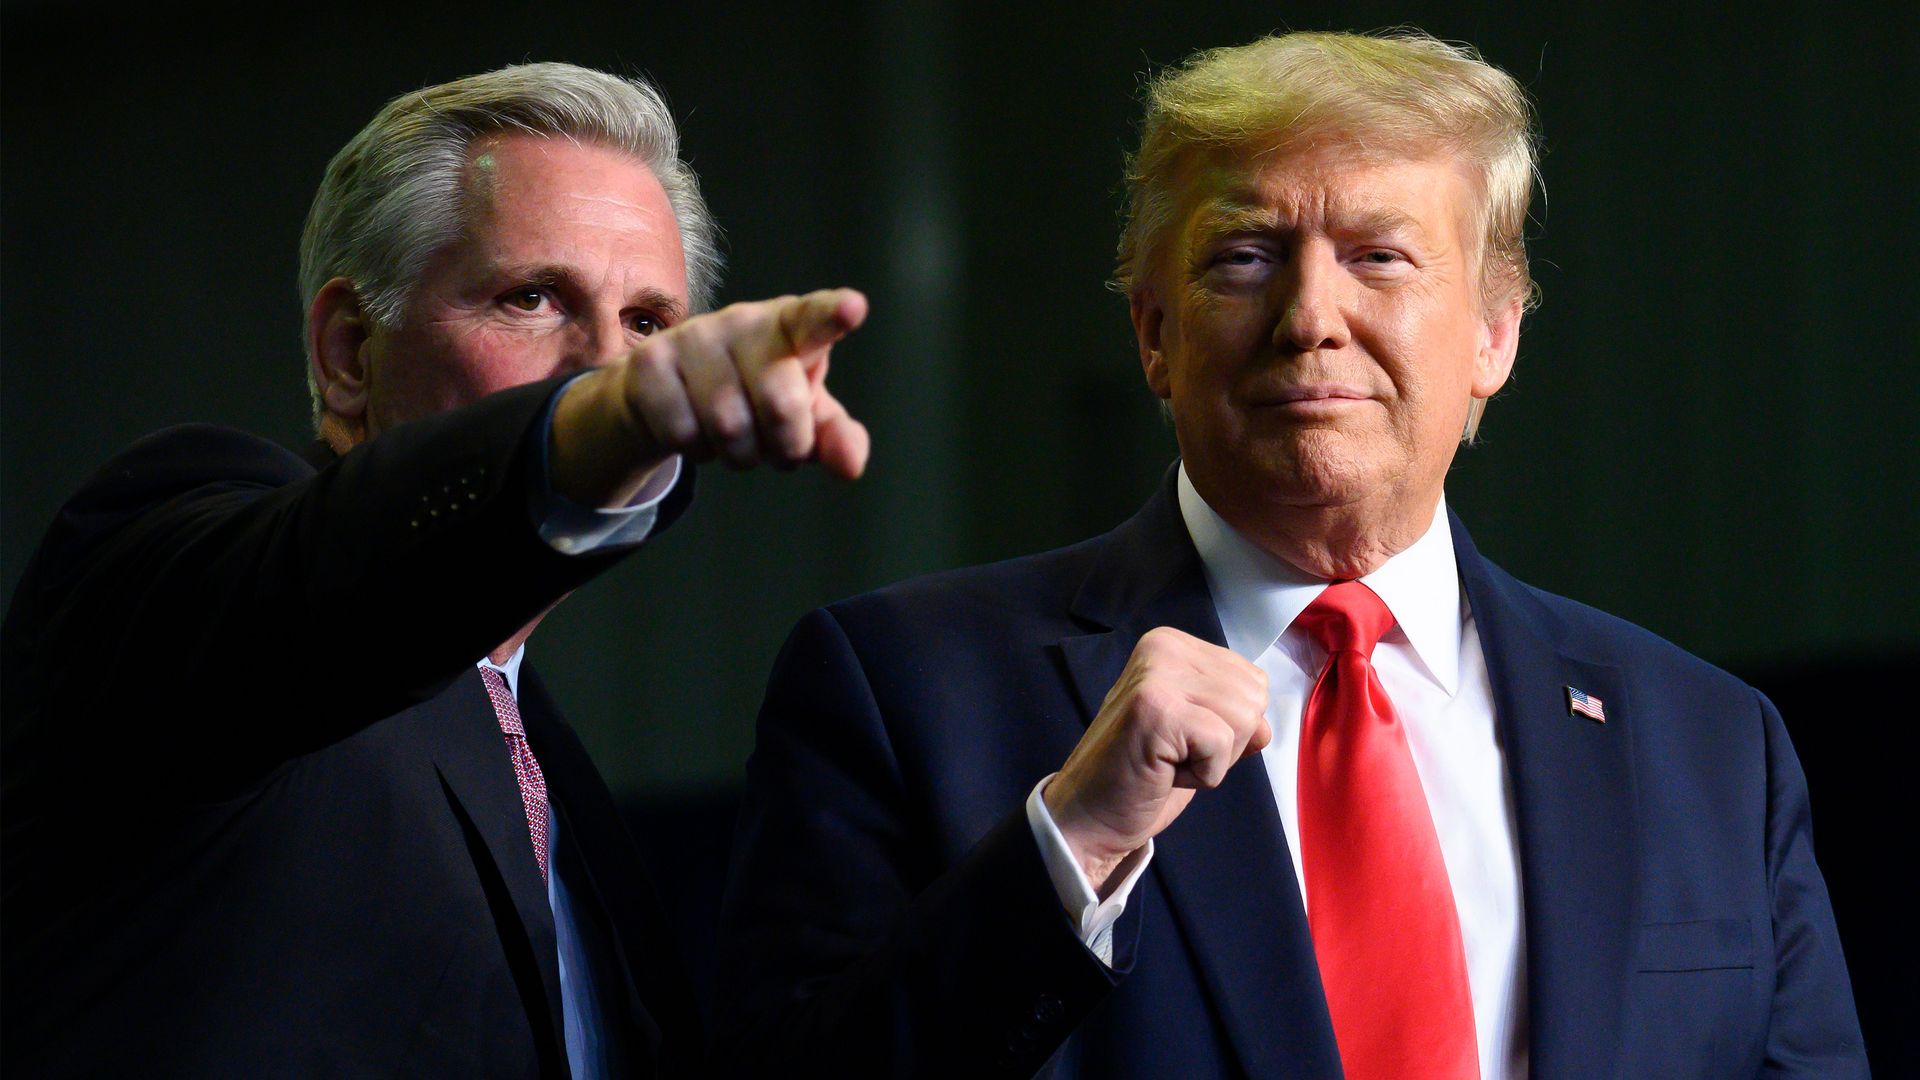 House Republican leader Kevin McCarthy points and then-President Donald Trump pump his fist at an event together in 2020